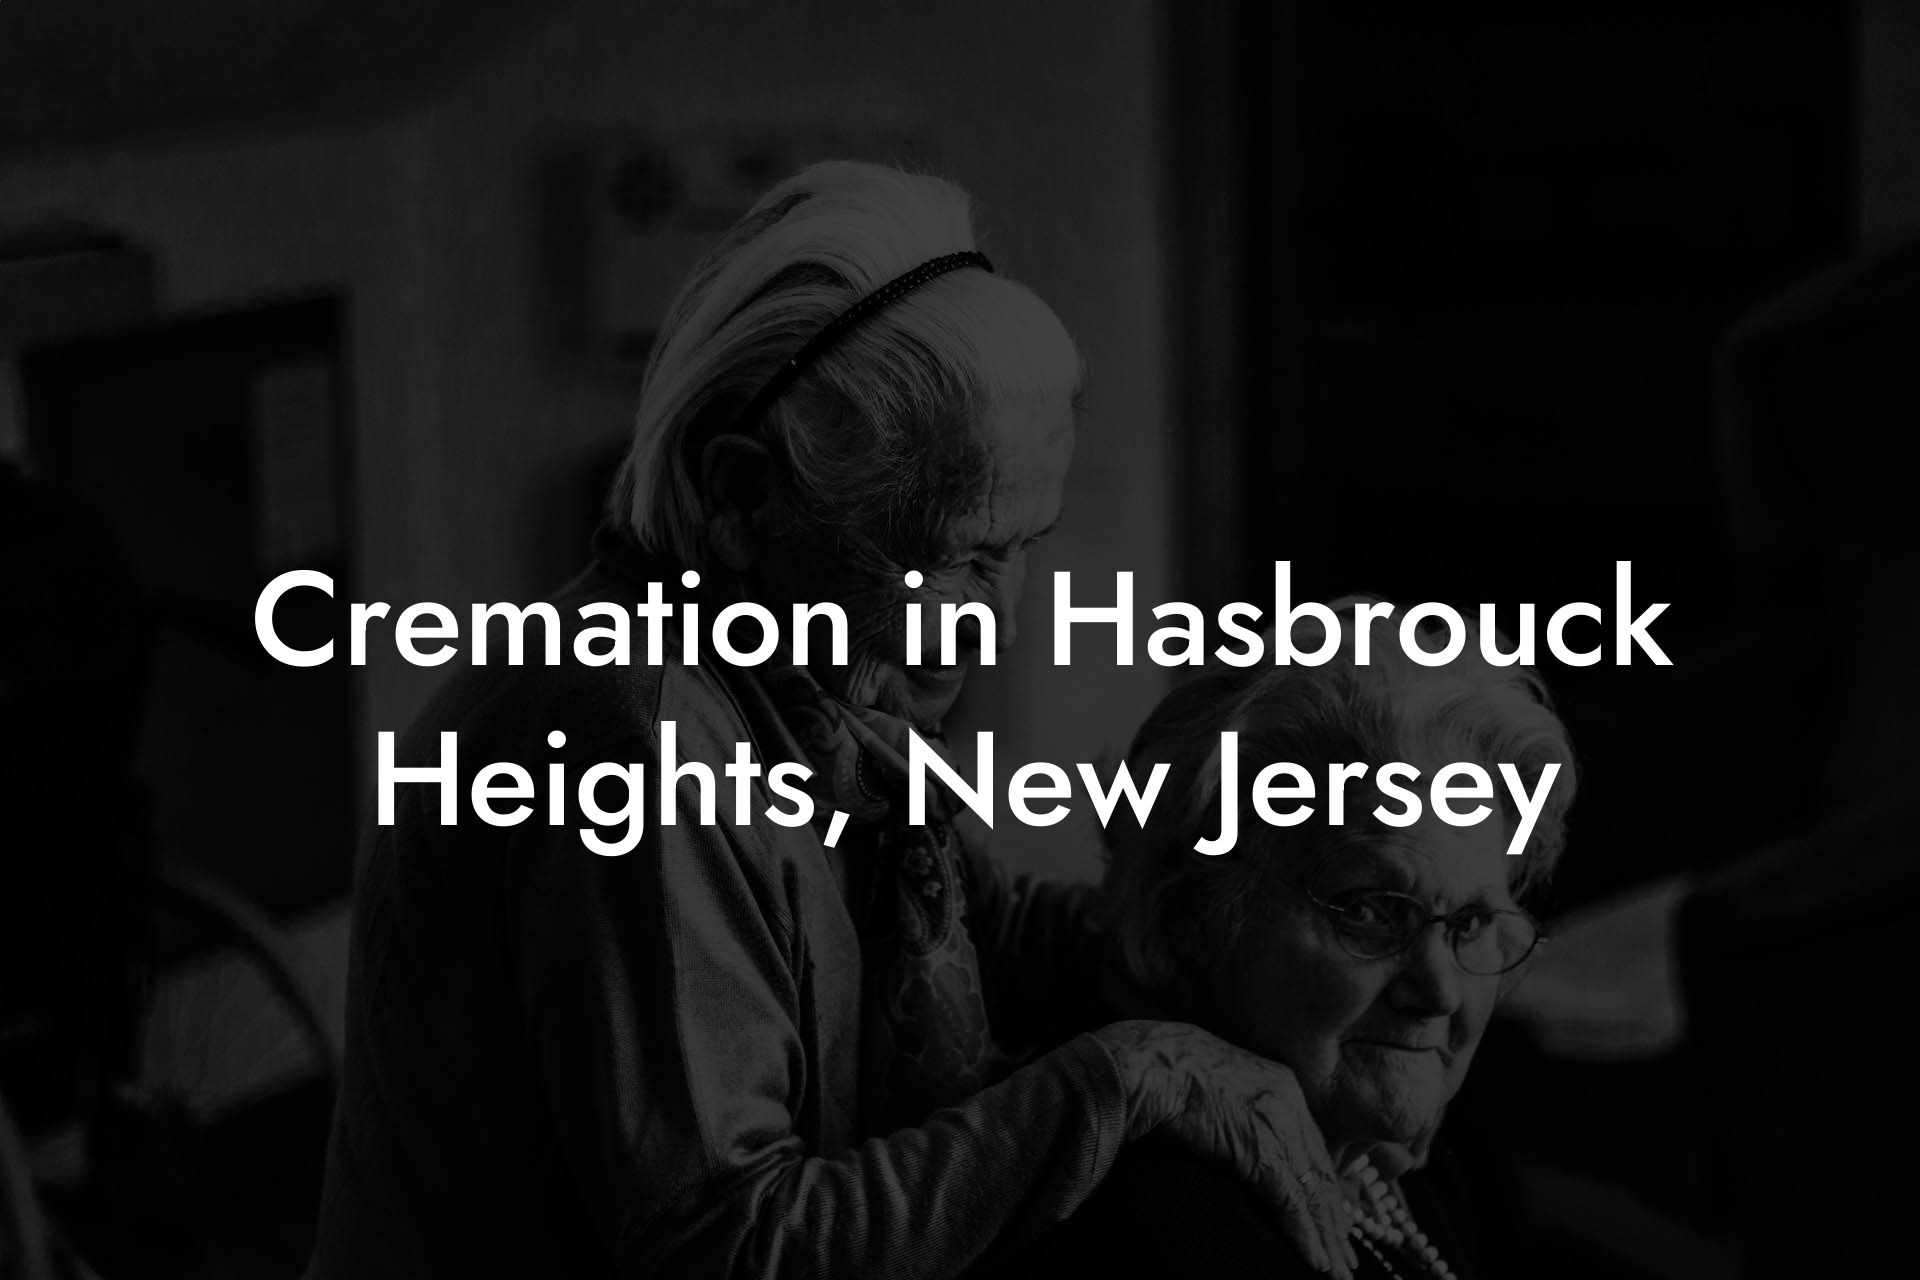 Cremation in Hasbrouck Heights, New Jersey